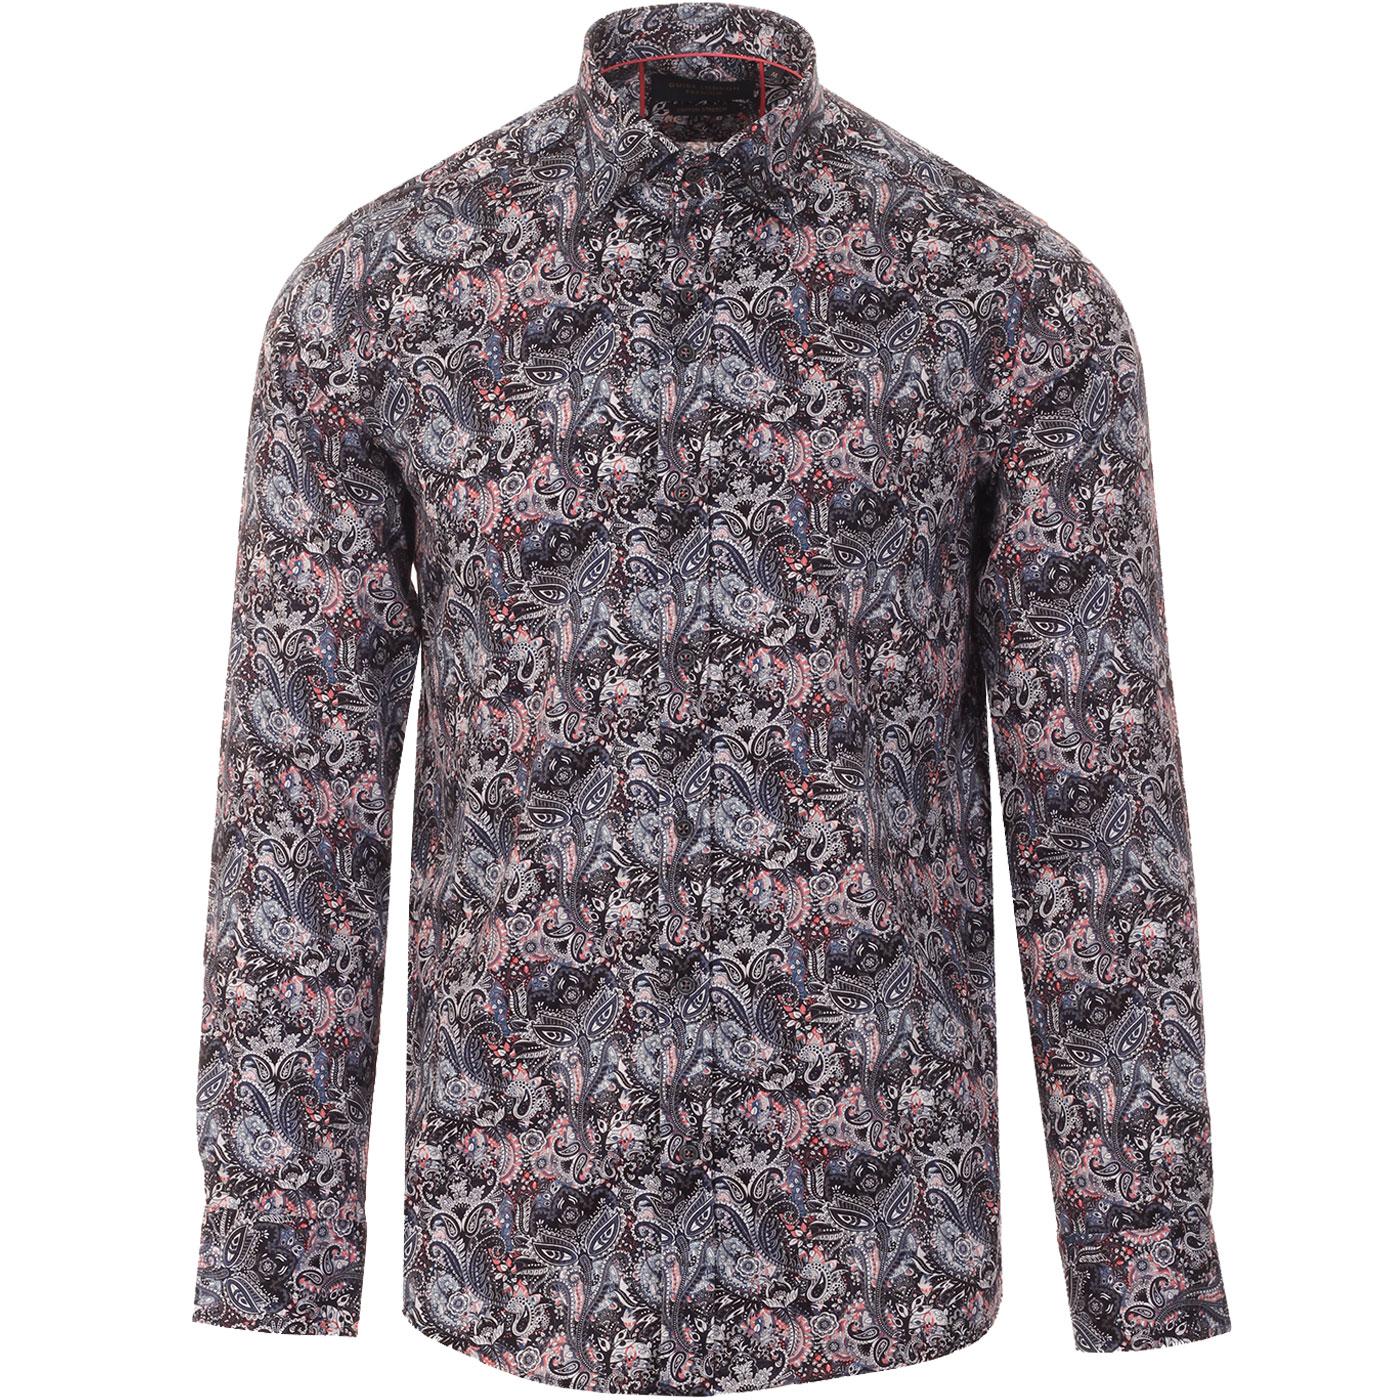 GUIDE LONDON Mod Floral Paisley Print Sateen Shirt in Navy